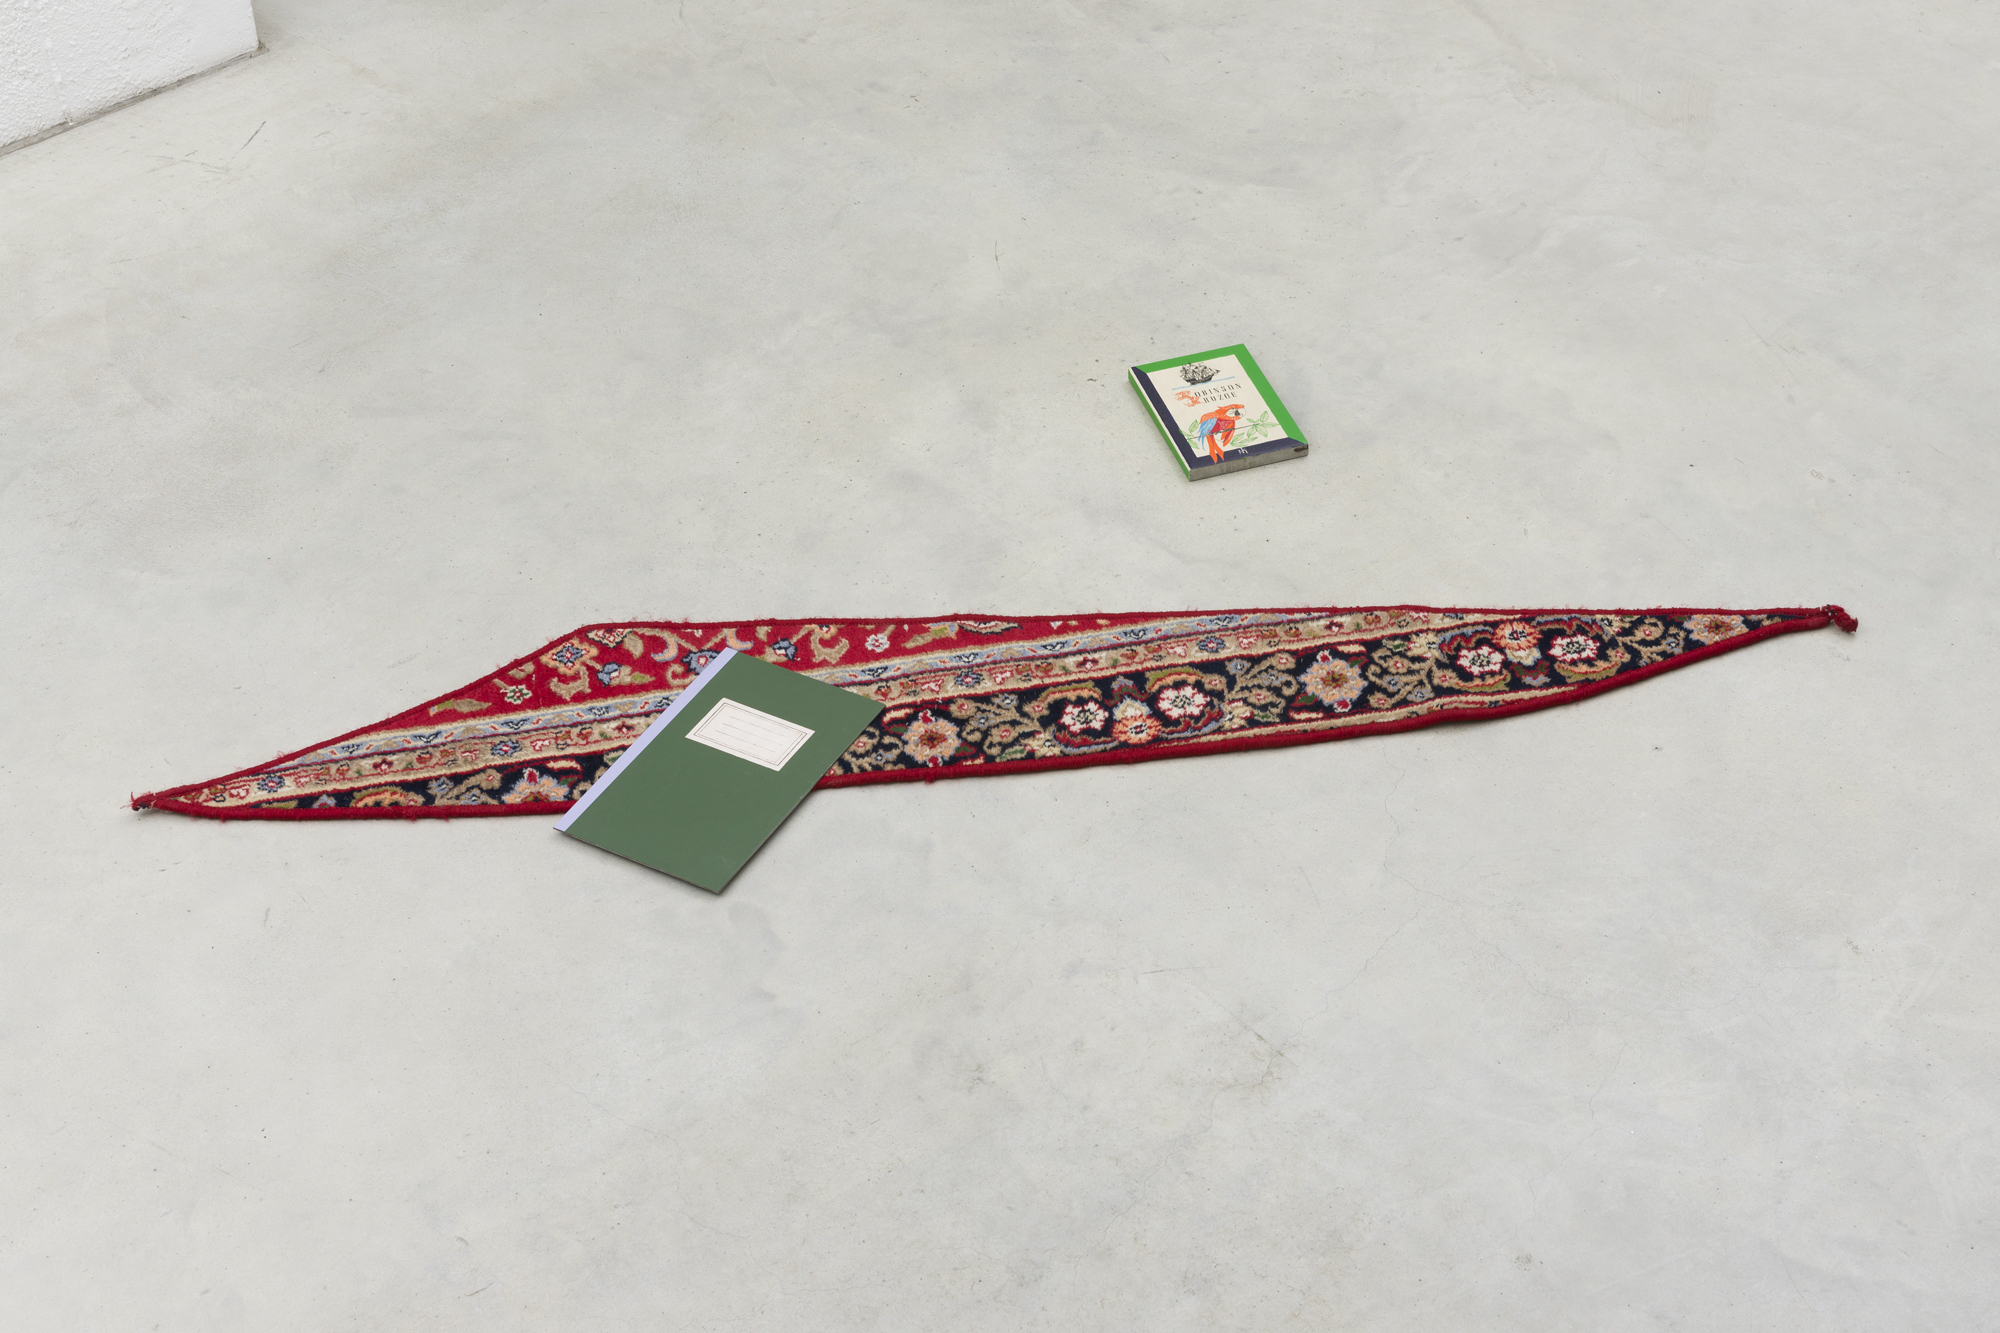 Carpet Piece with Book and Notebook, carpet, thread, acrylic on steel, variable dimensions, 2014